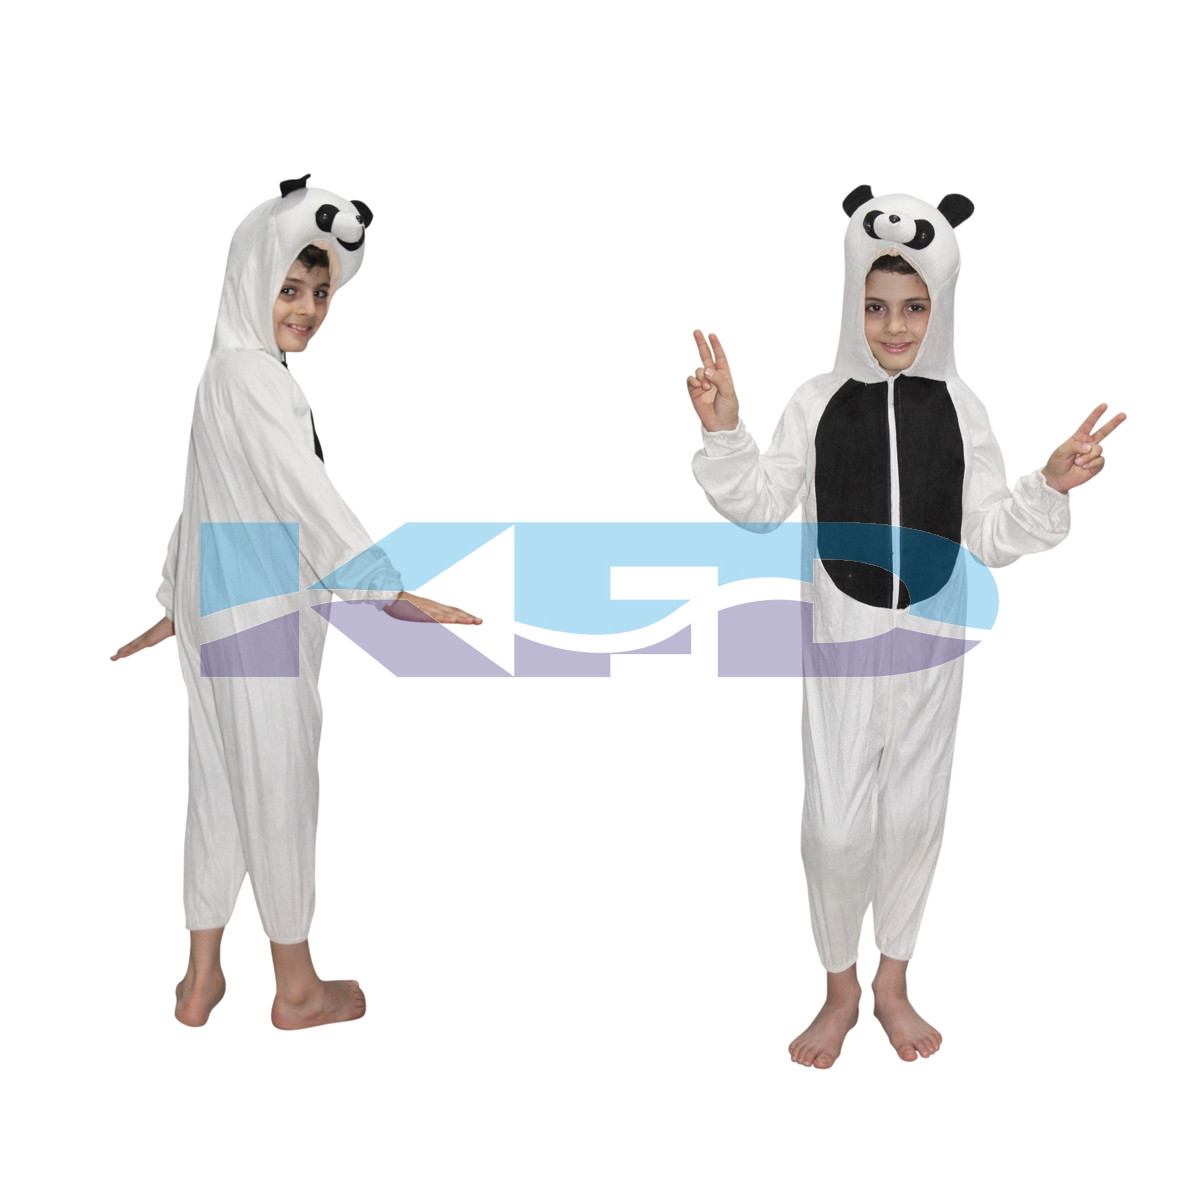 Panda Bear fancy dress for kids,International Animal Costume for School Annual function/Theme Party/Competition/Stage Shows Dress